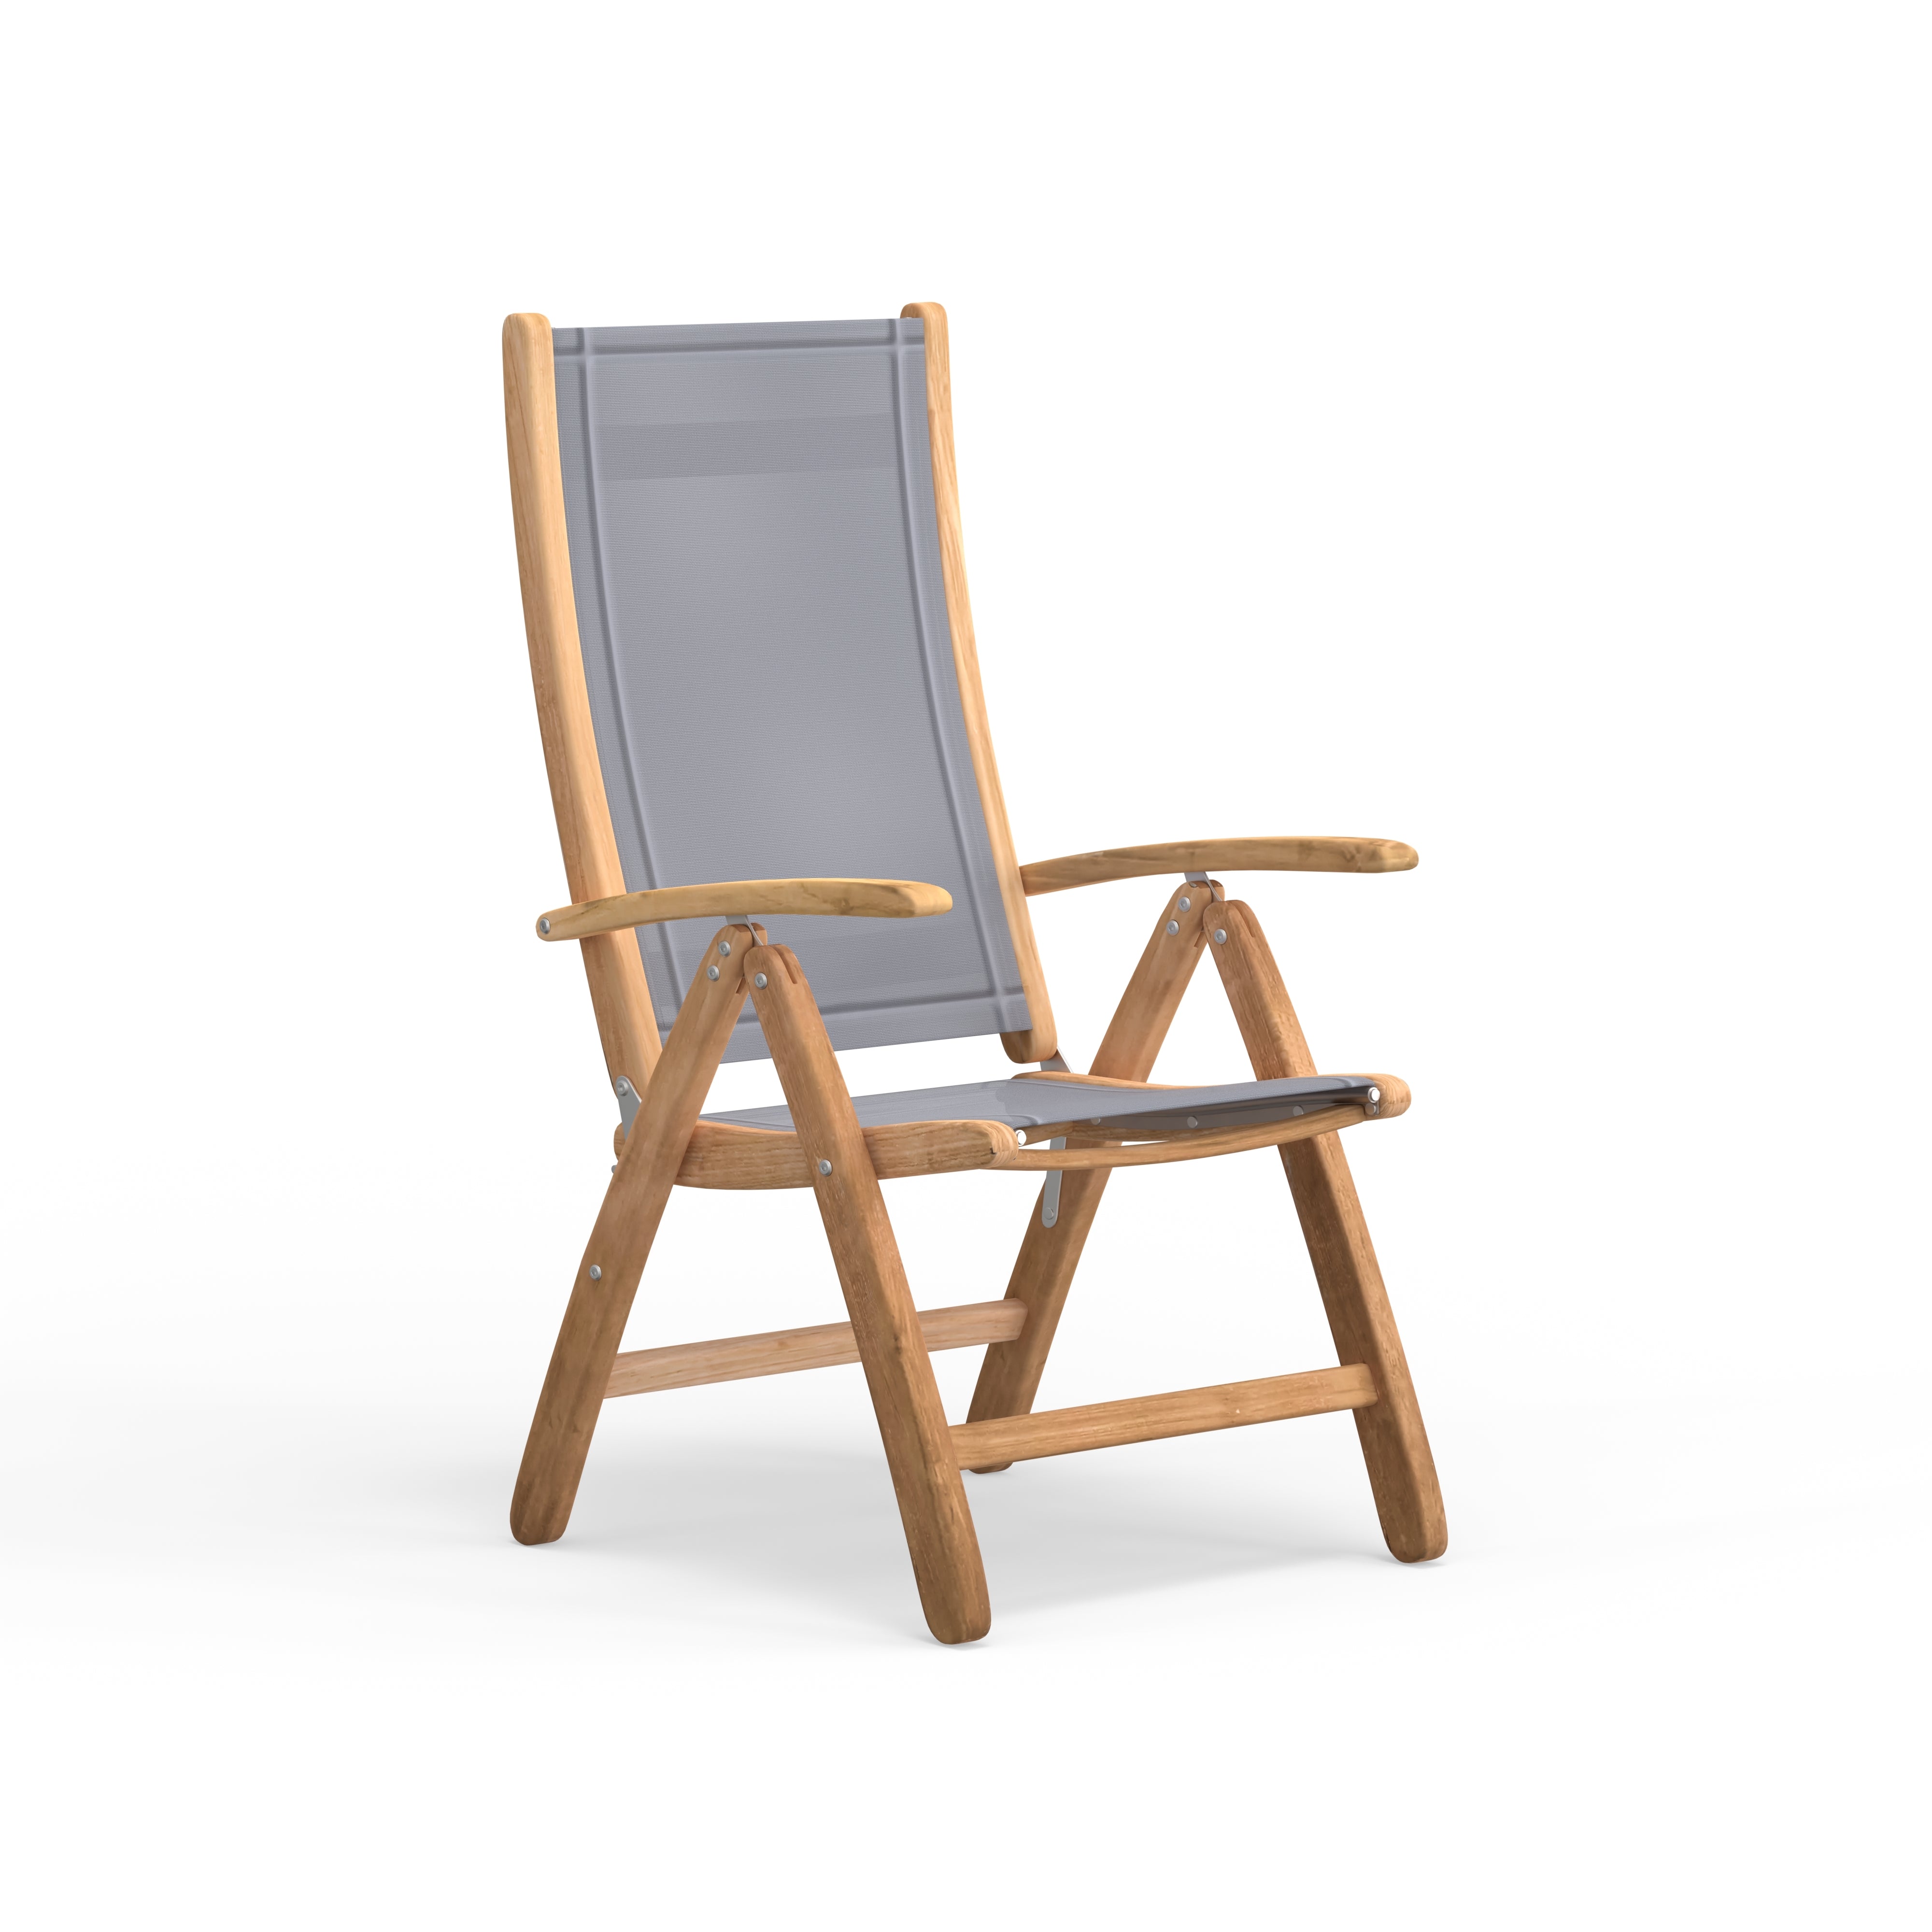 Highest Quality Teak Outdoor Reclining Chair That Will Last Forever